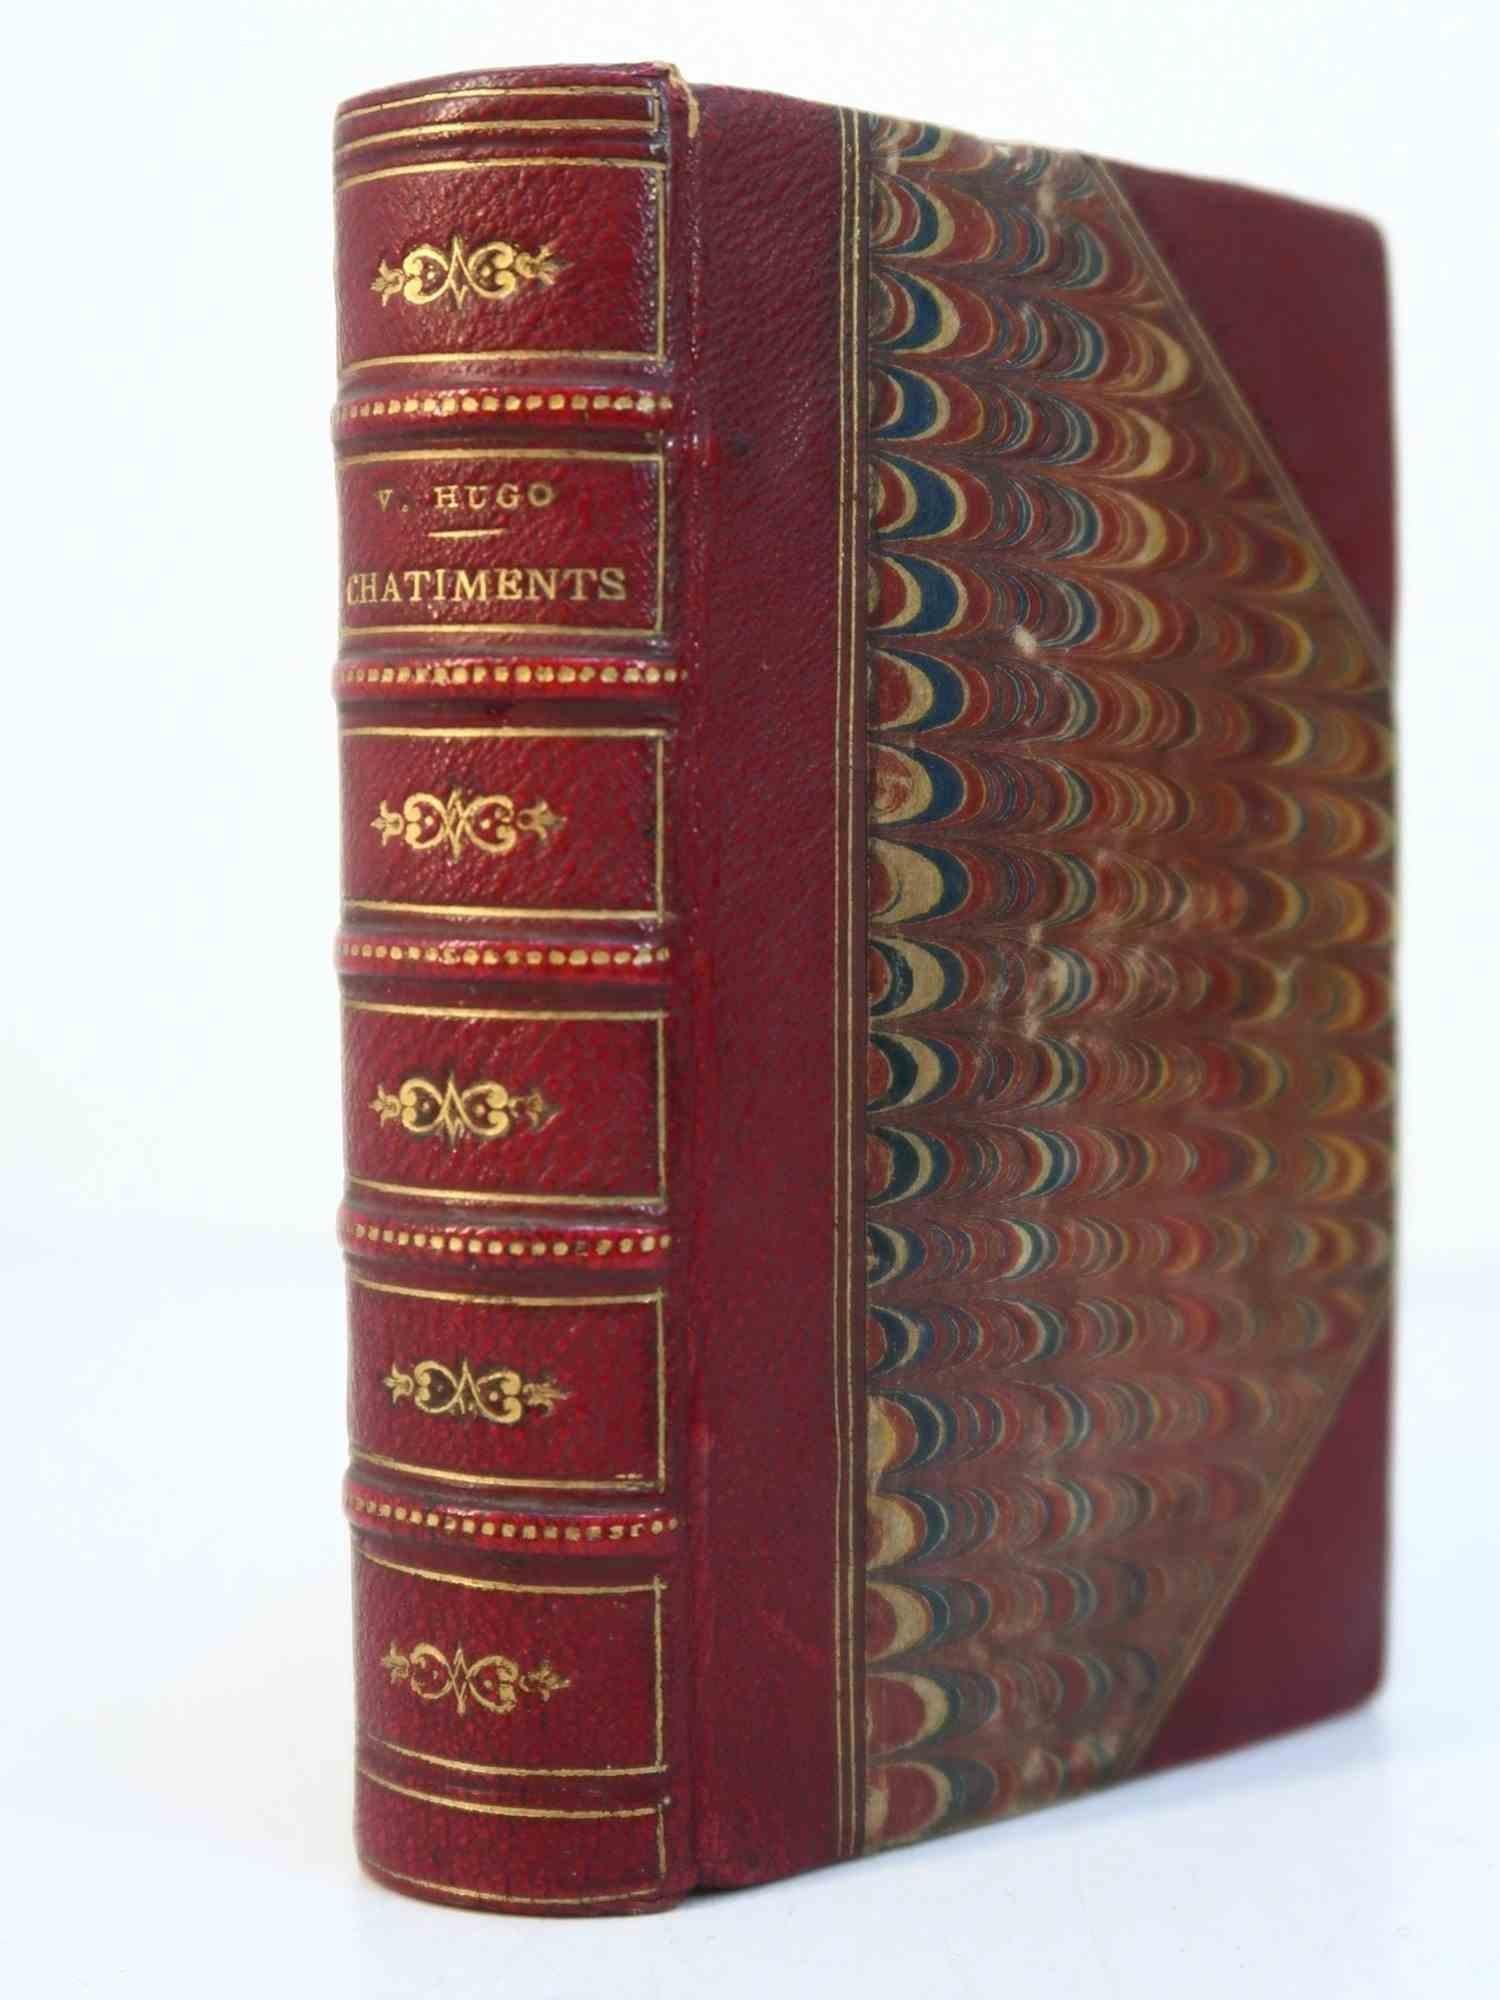 Châtiments - Rare Book by Victor Hugo - 1853 For Sale 1